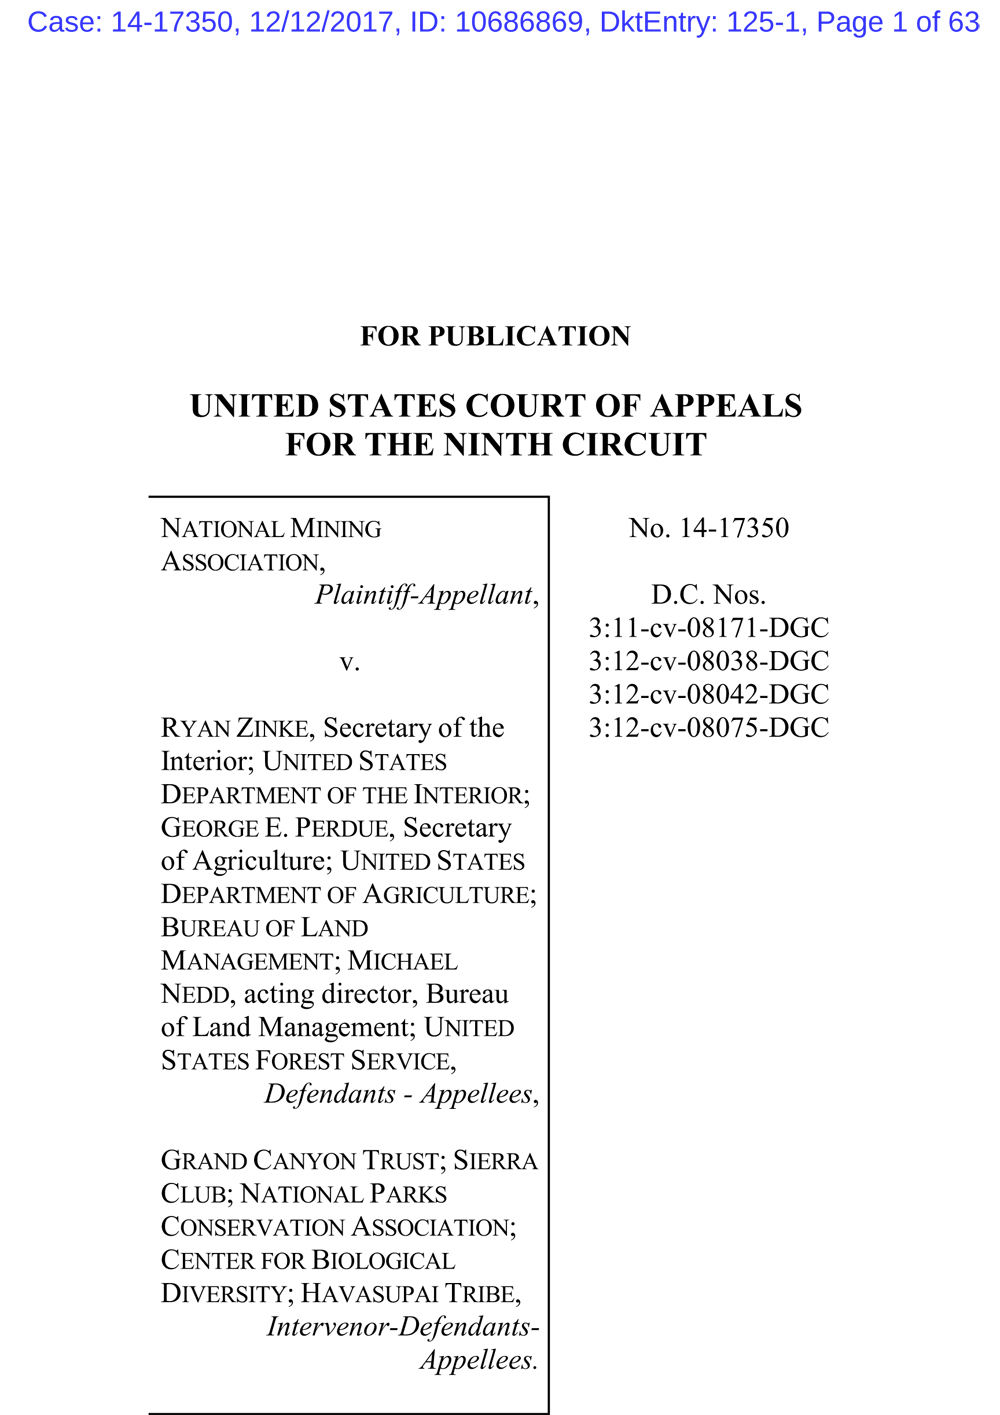 9th Circuit decision upholding Grand Canyon mineral withdrawal, first page